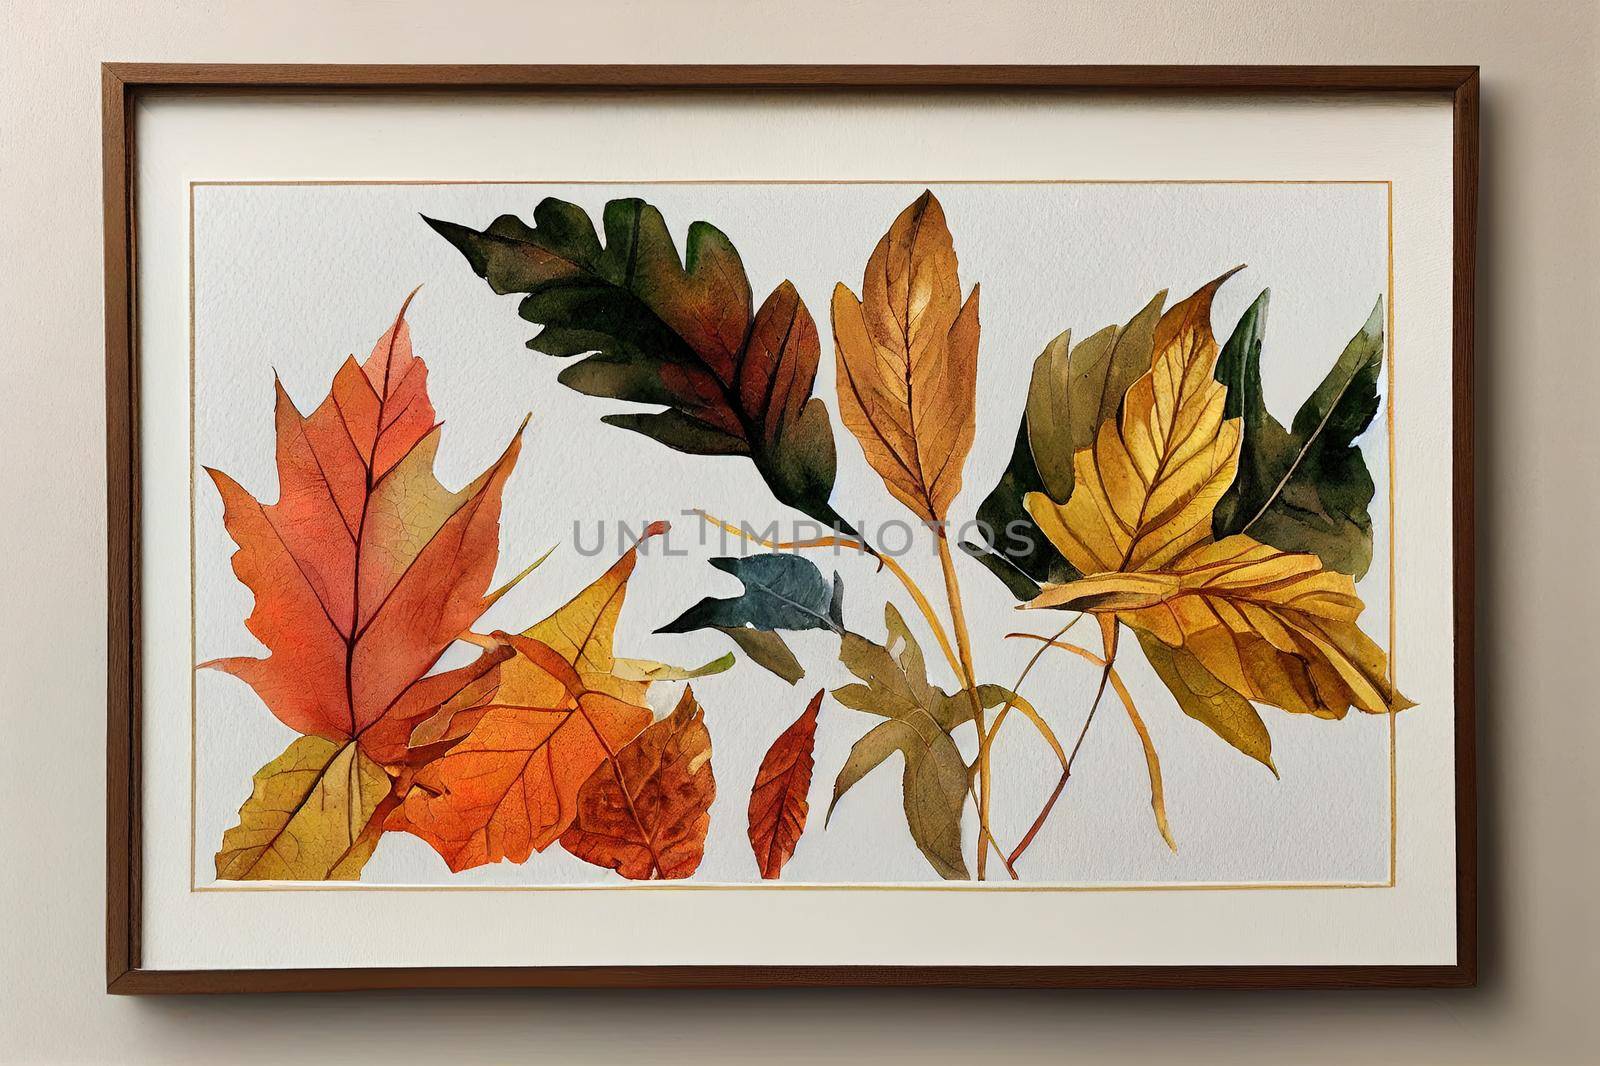 Autumn leaf and foliage corner border. Watercolor hand painted fall leaves illustrtaion. Botanical frame on white background.. High quality illustration